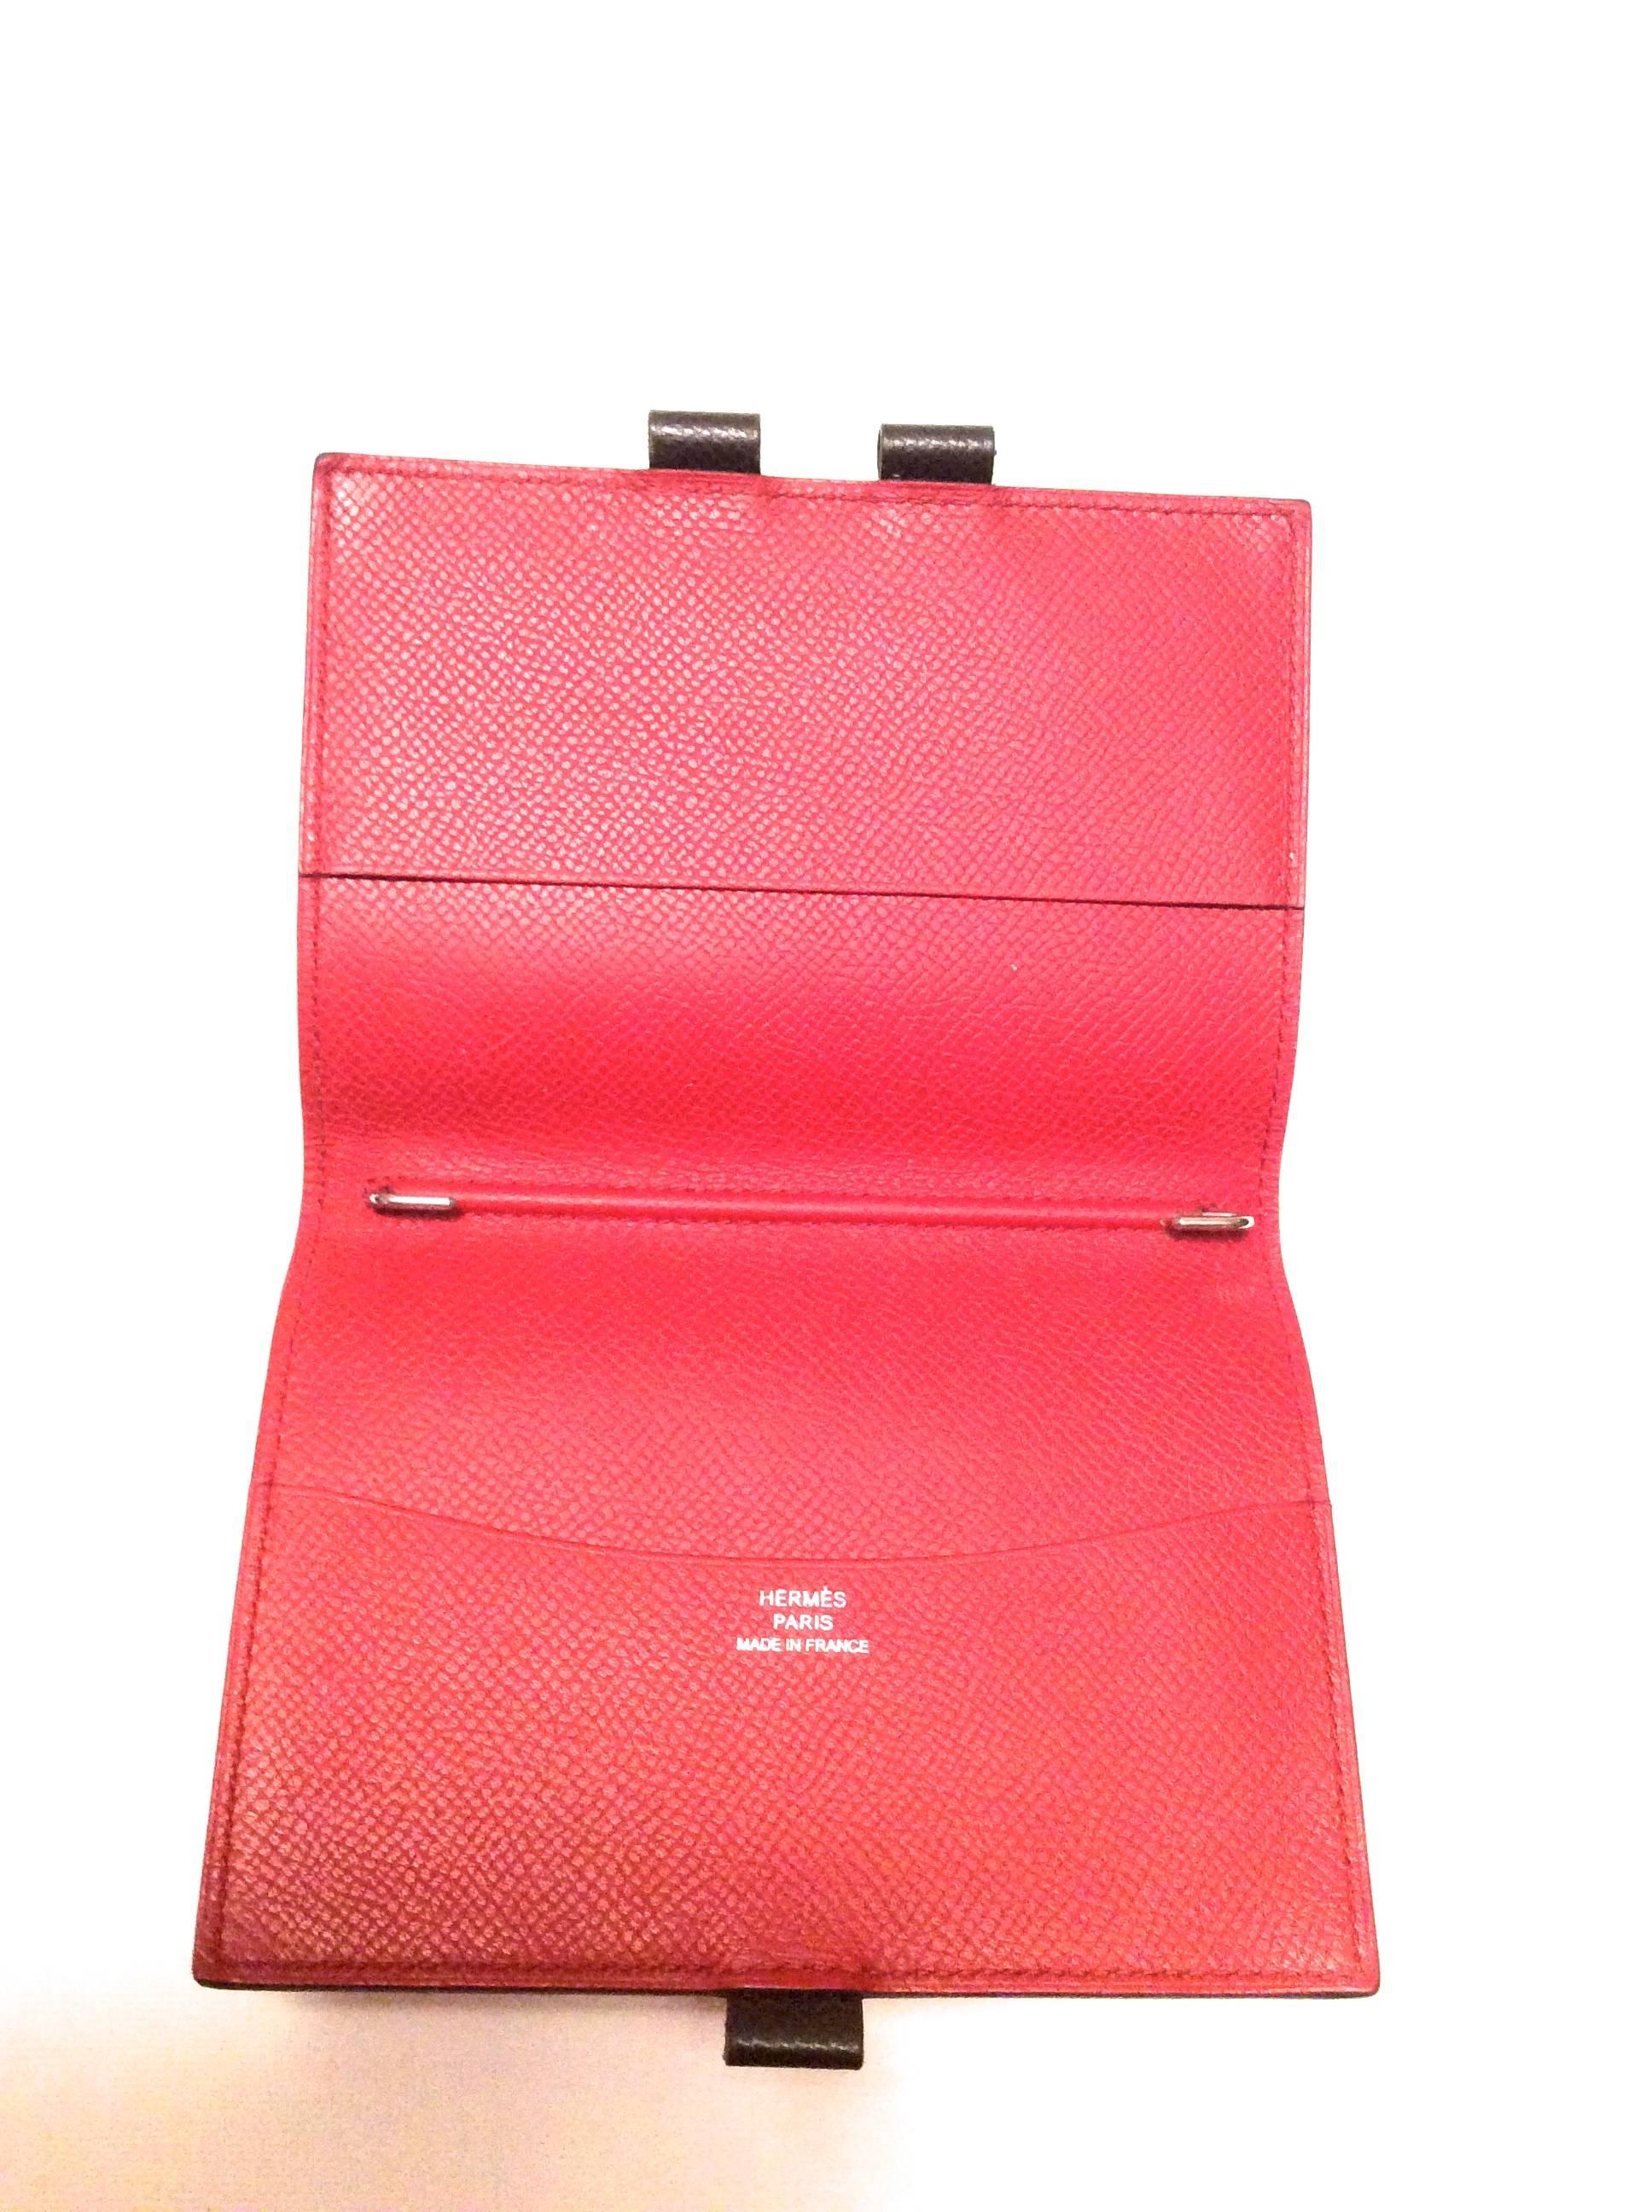 Hermes Agenda / Notebook with Sterling Silver Pen 1